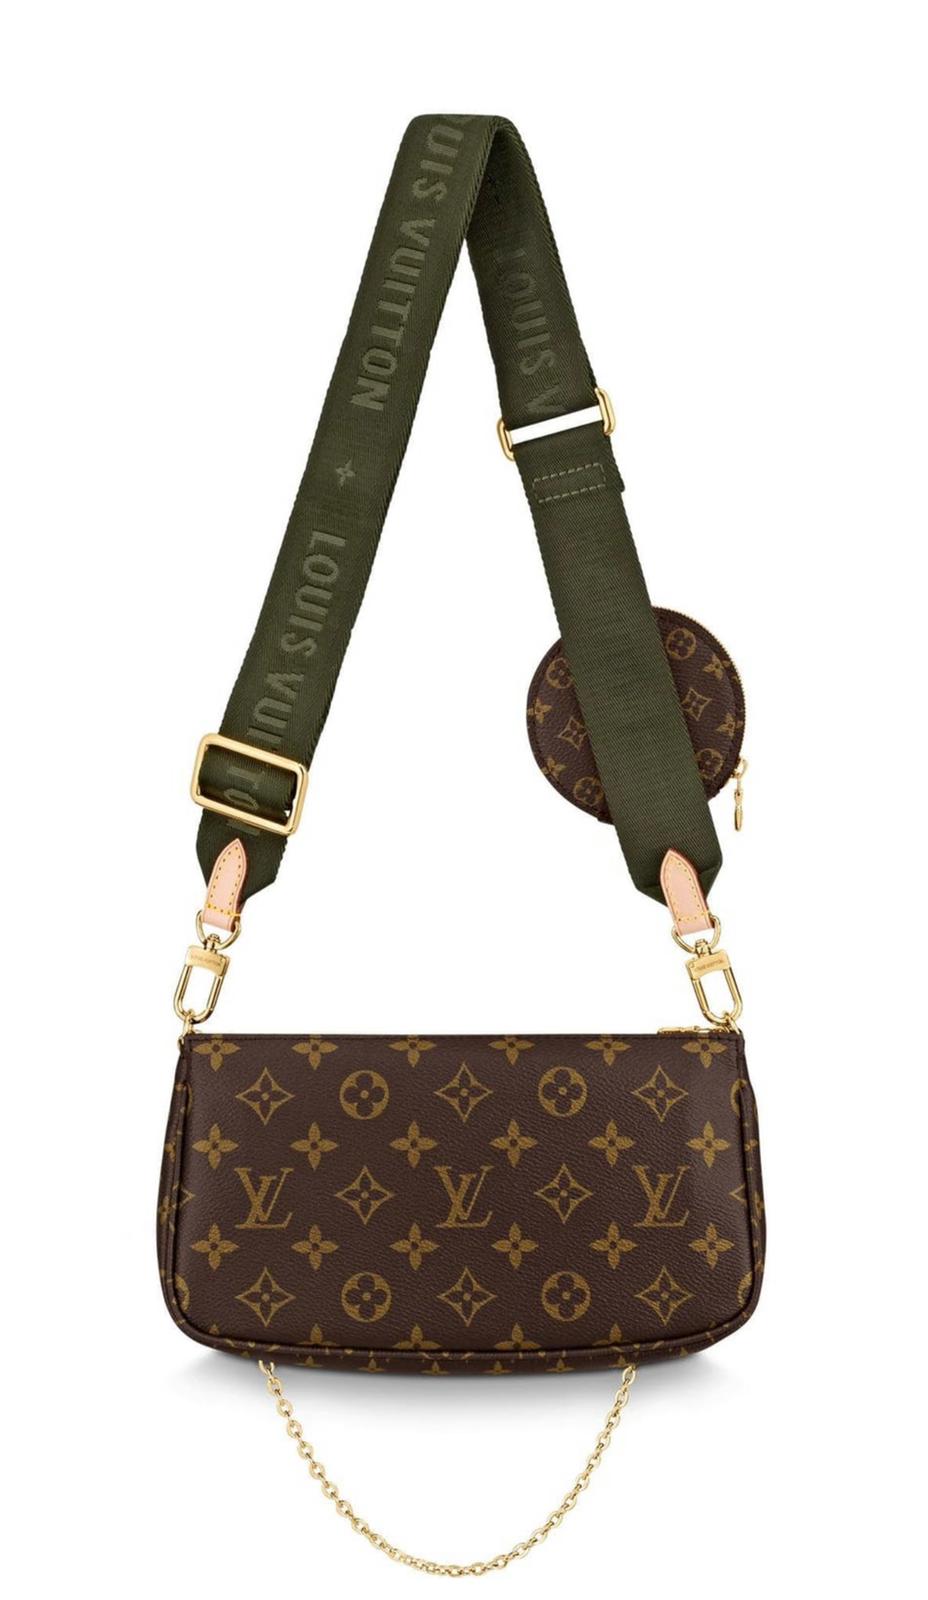 Louis Vuitton on X: Early morning sunrise. A pastel Monogram